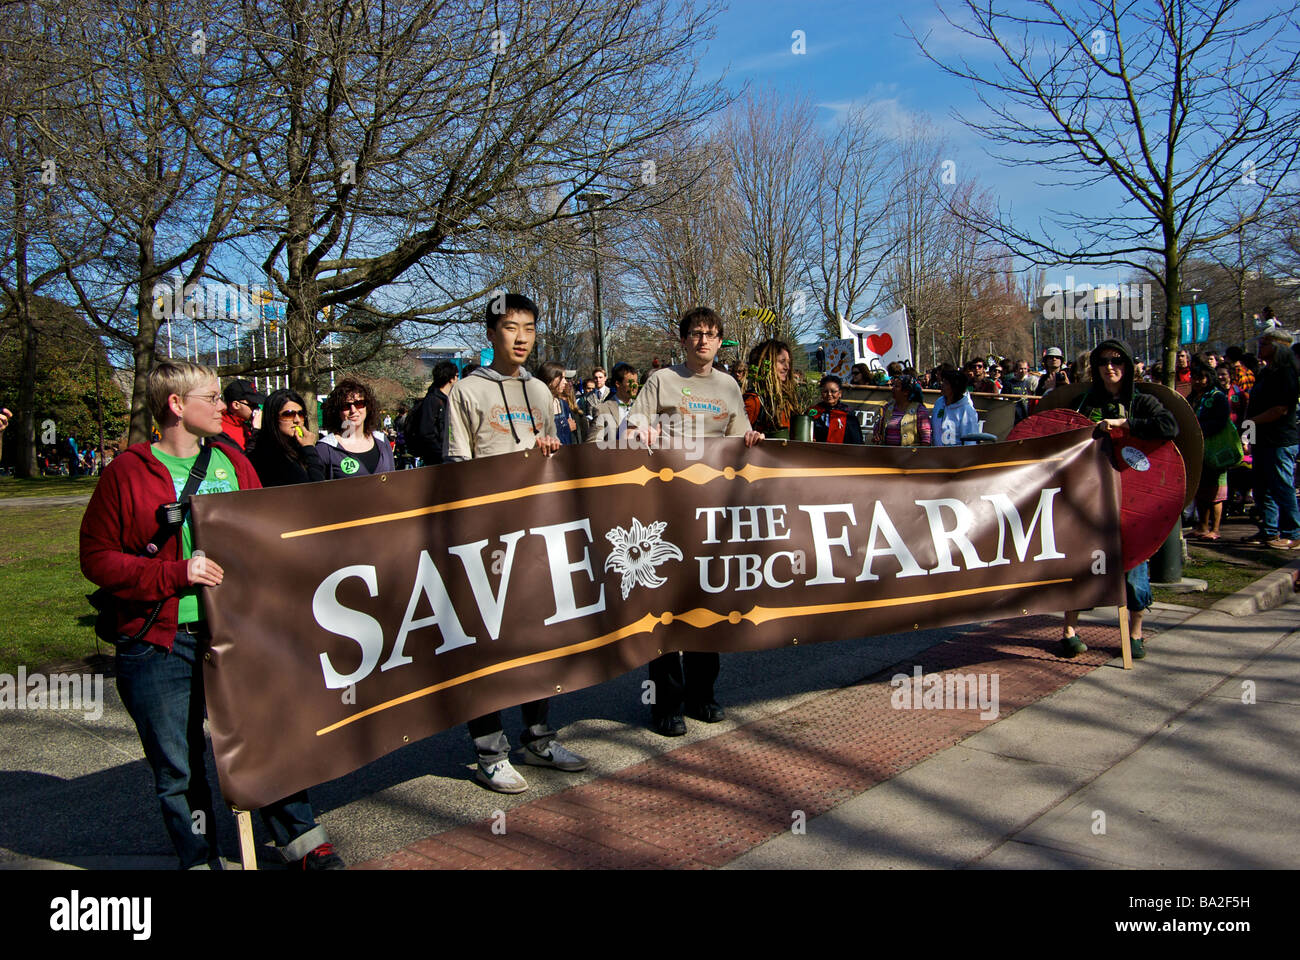 Save the Farm peaceful protest march on University of British Columbia campus Stock Photo